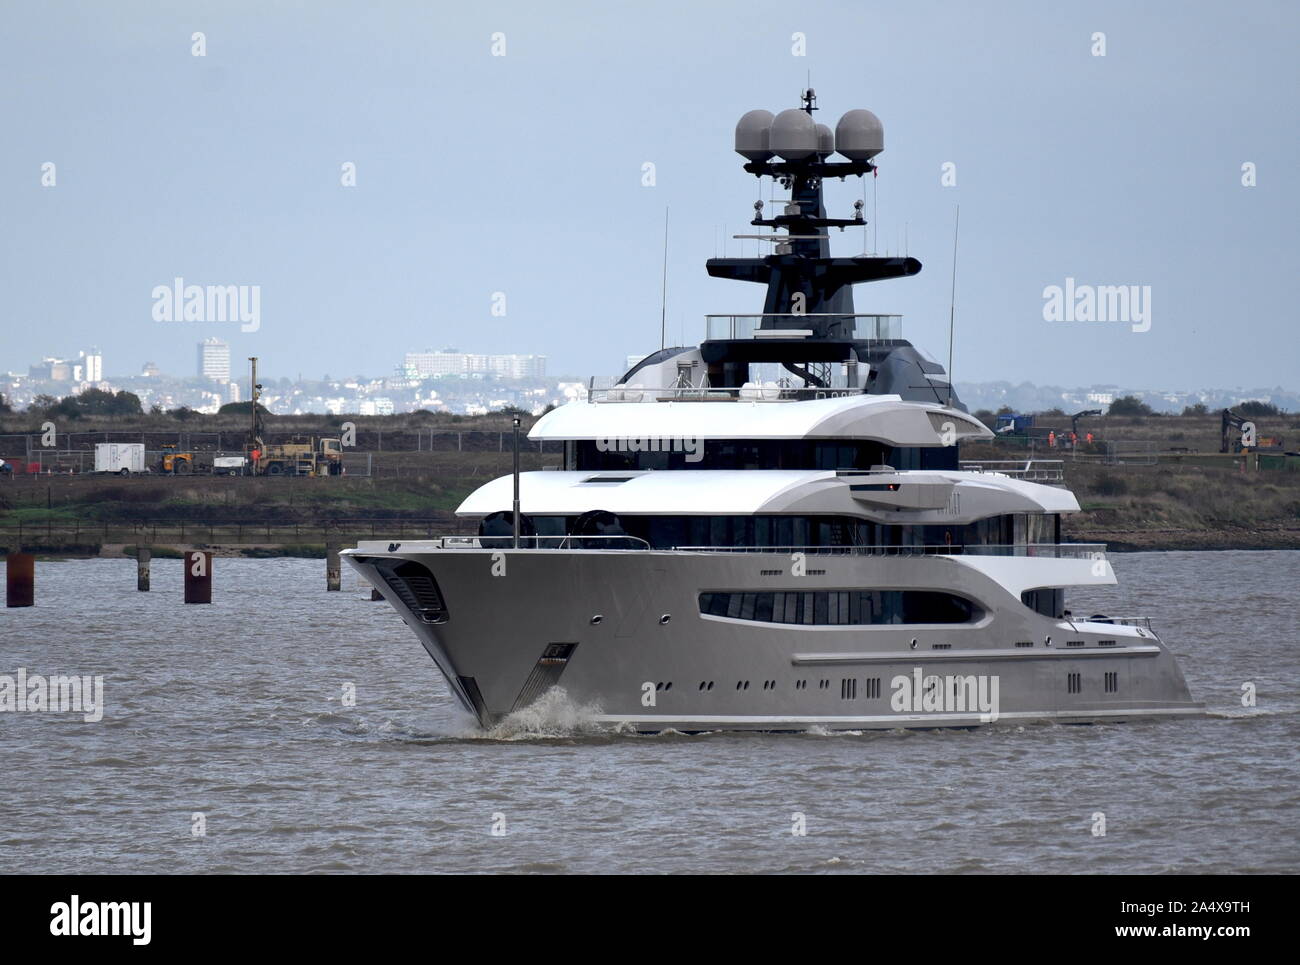 Kismet is an incredible superyacht owned by Mr Shahid Khan, owner of Fulham FC and the Jacksonville Jaguars. The yacht was designed by Espen Oeino Stock Photo